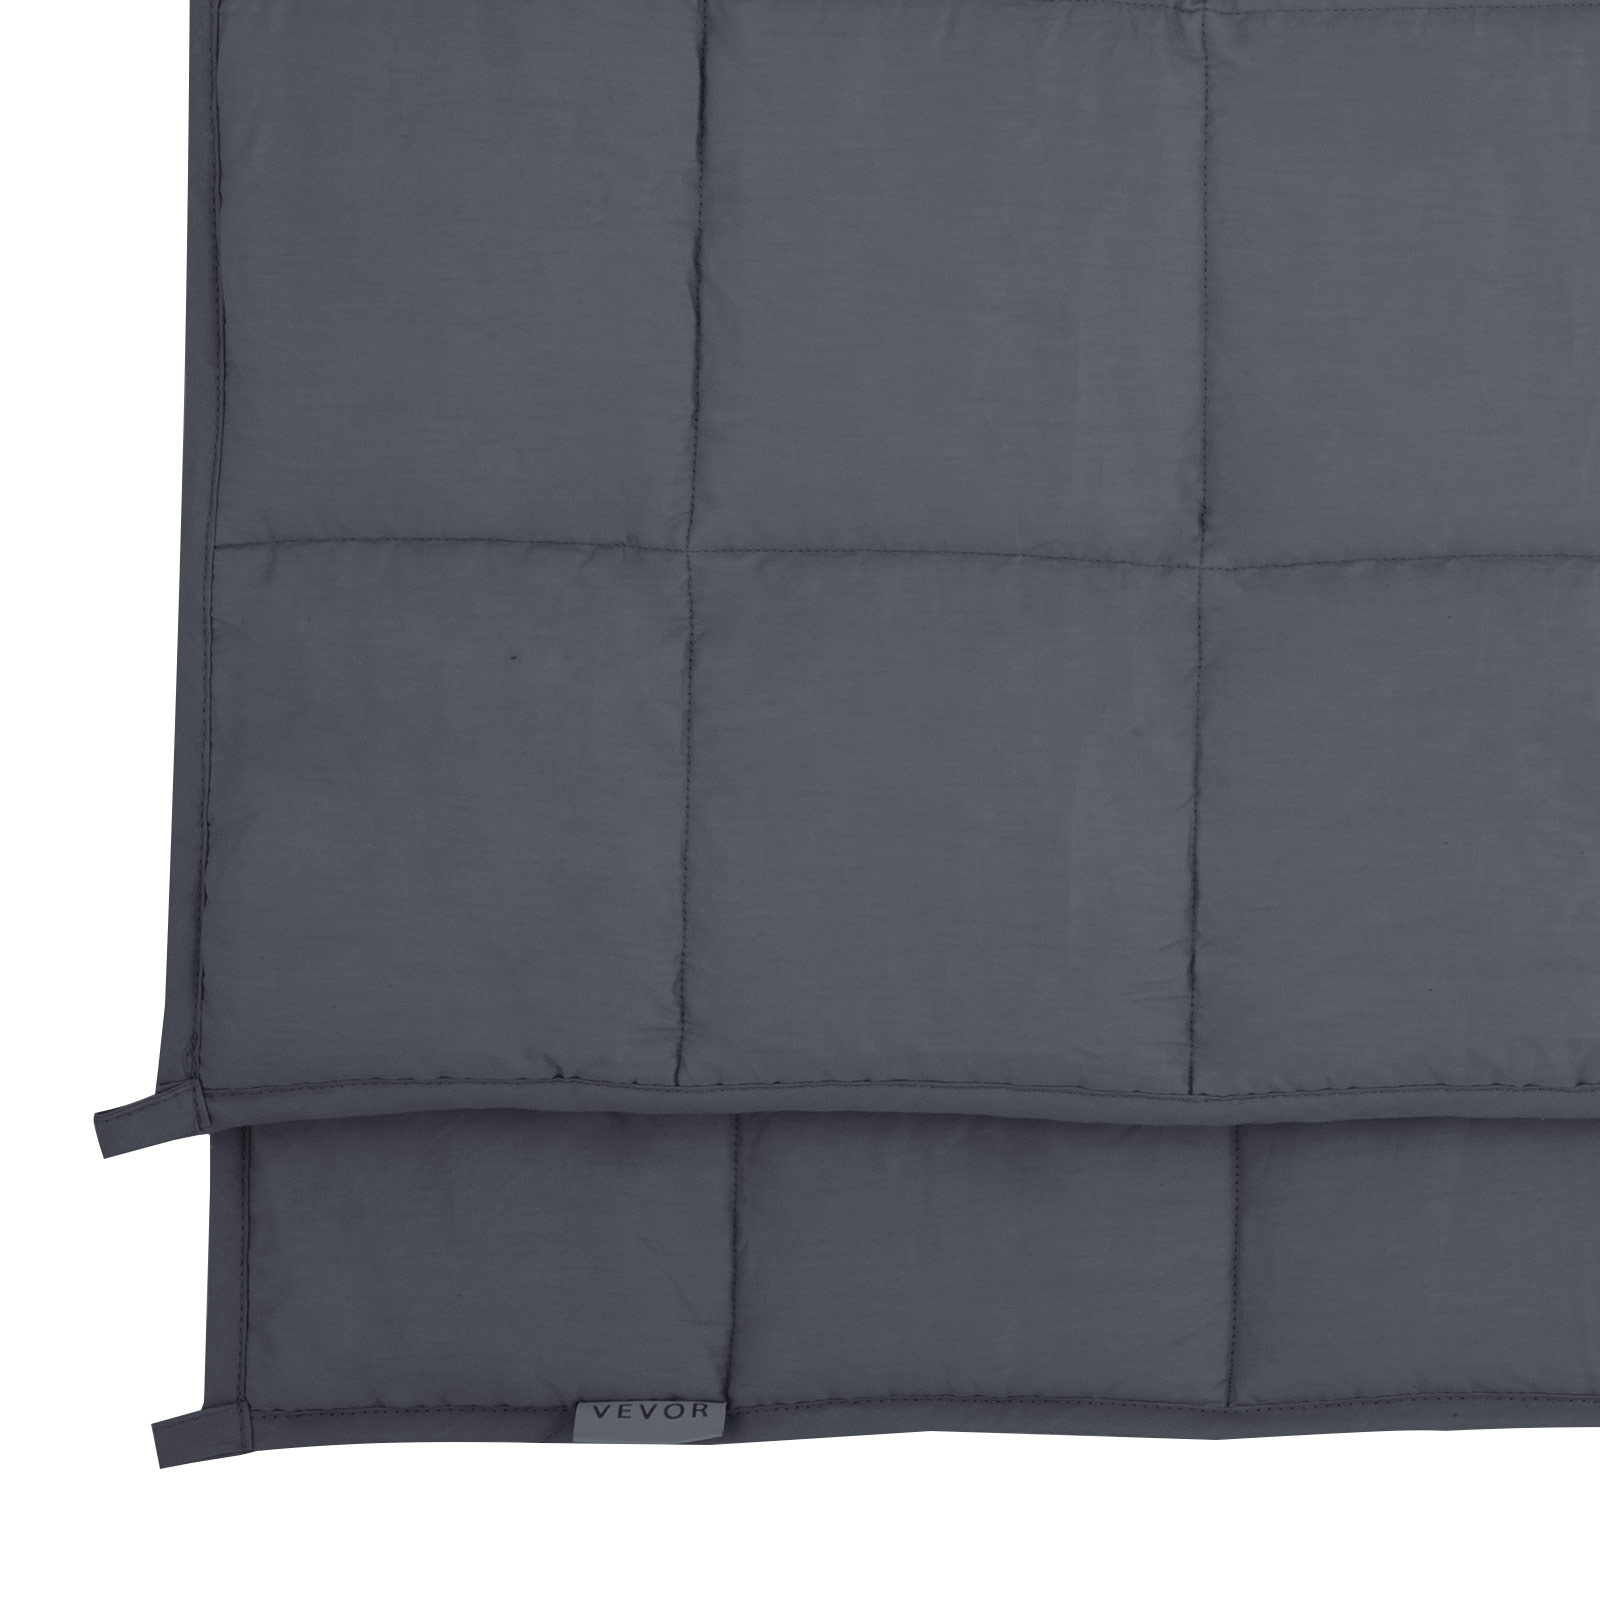 Weighted Blankets Help Sufferers Of Anxiety - Simplemost